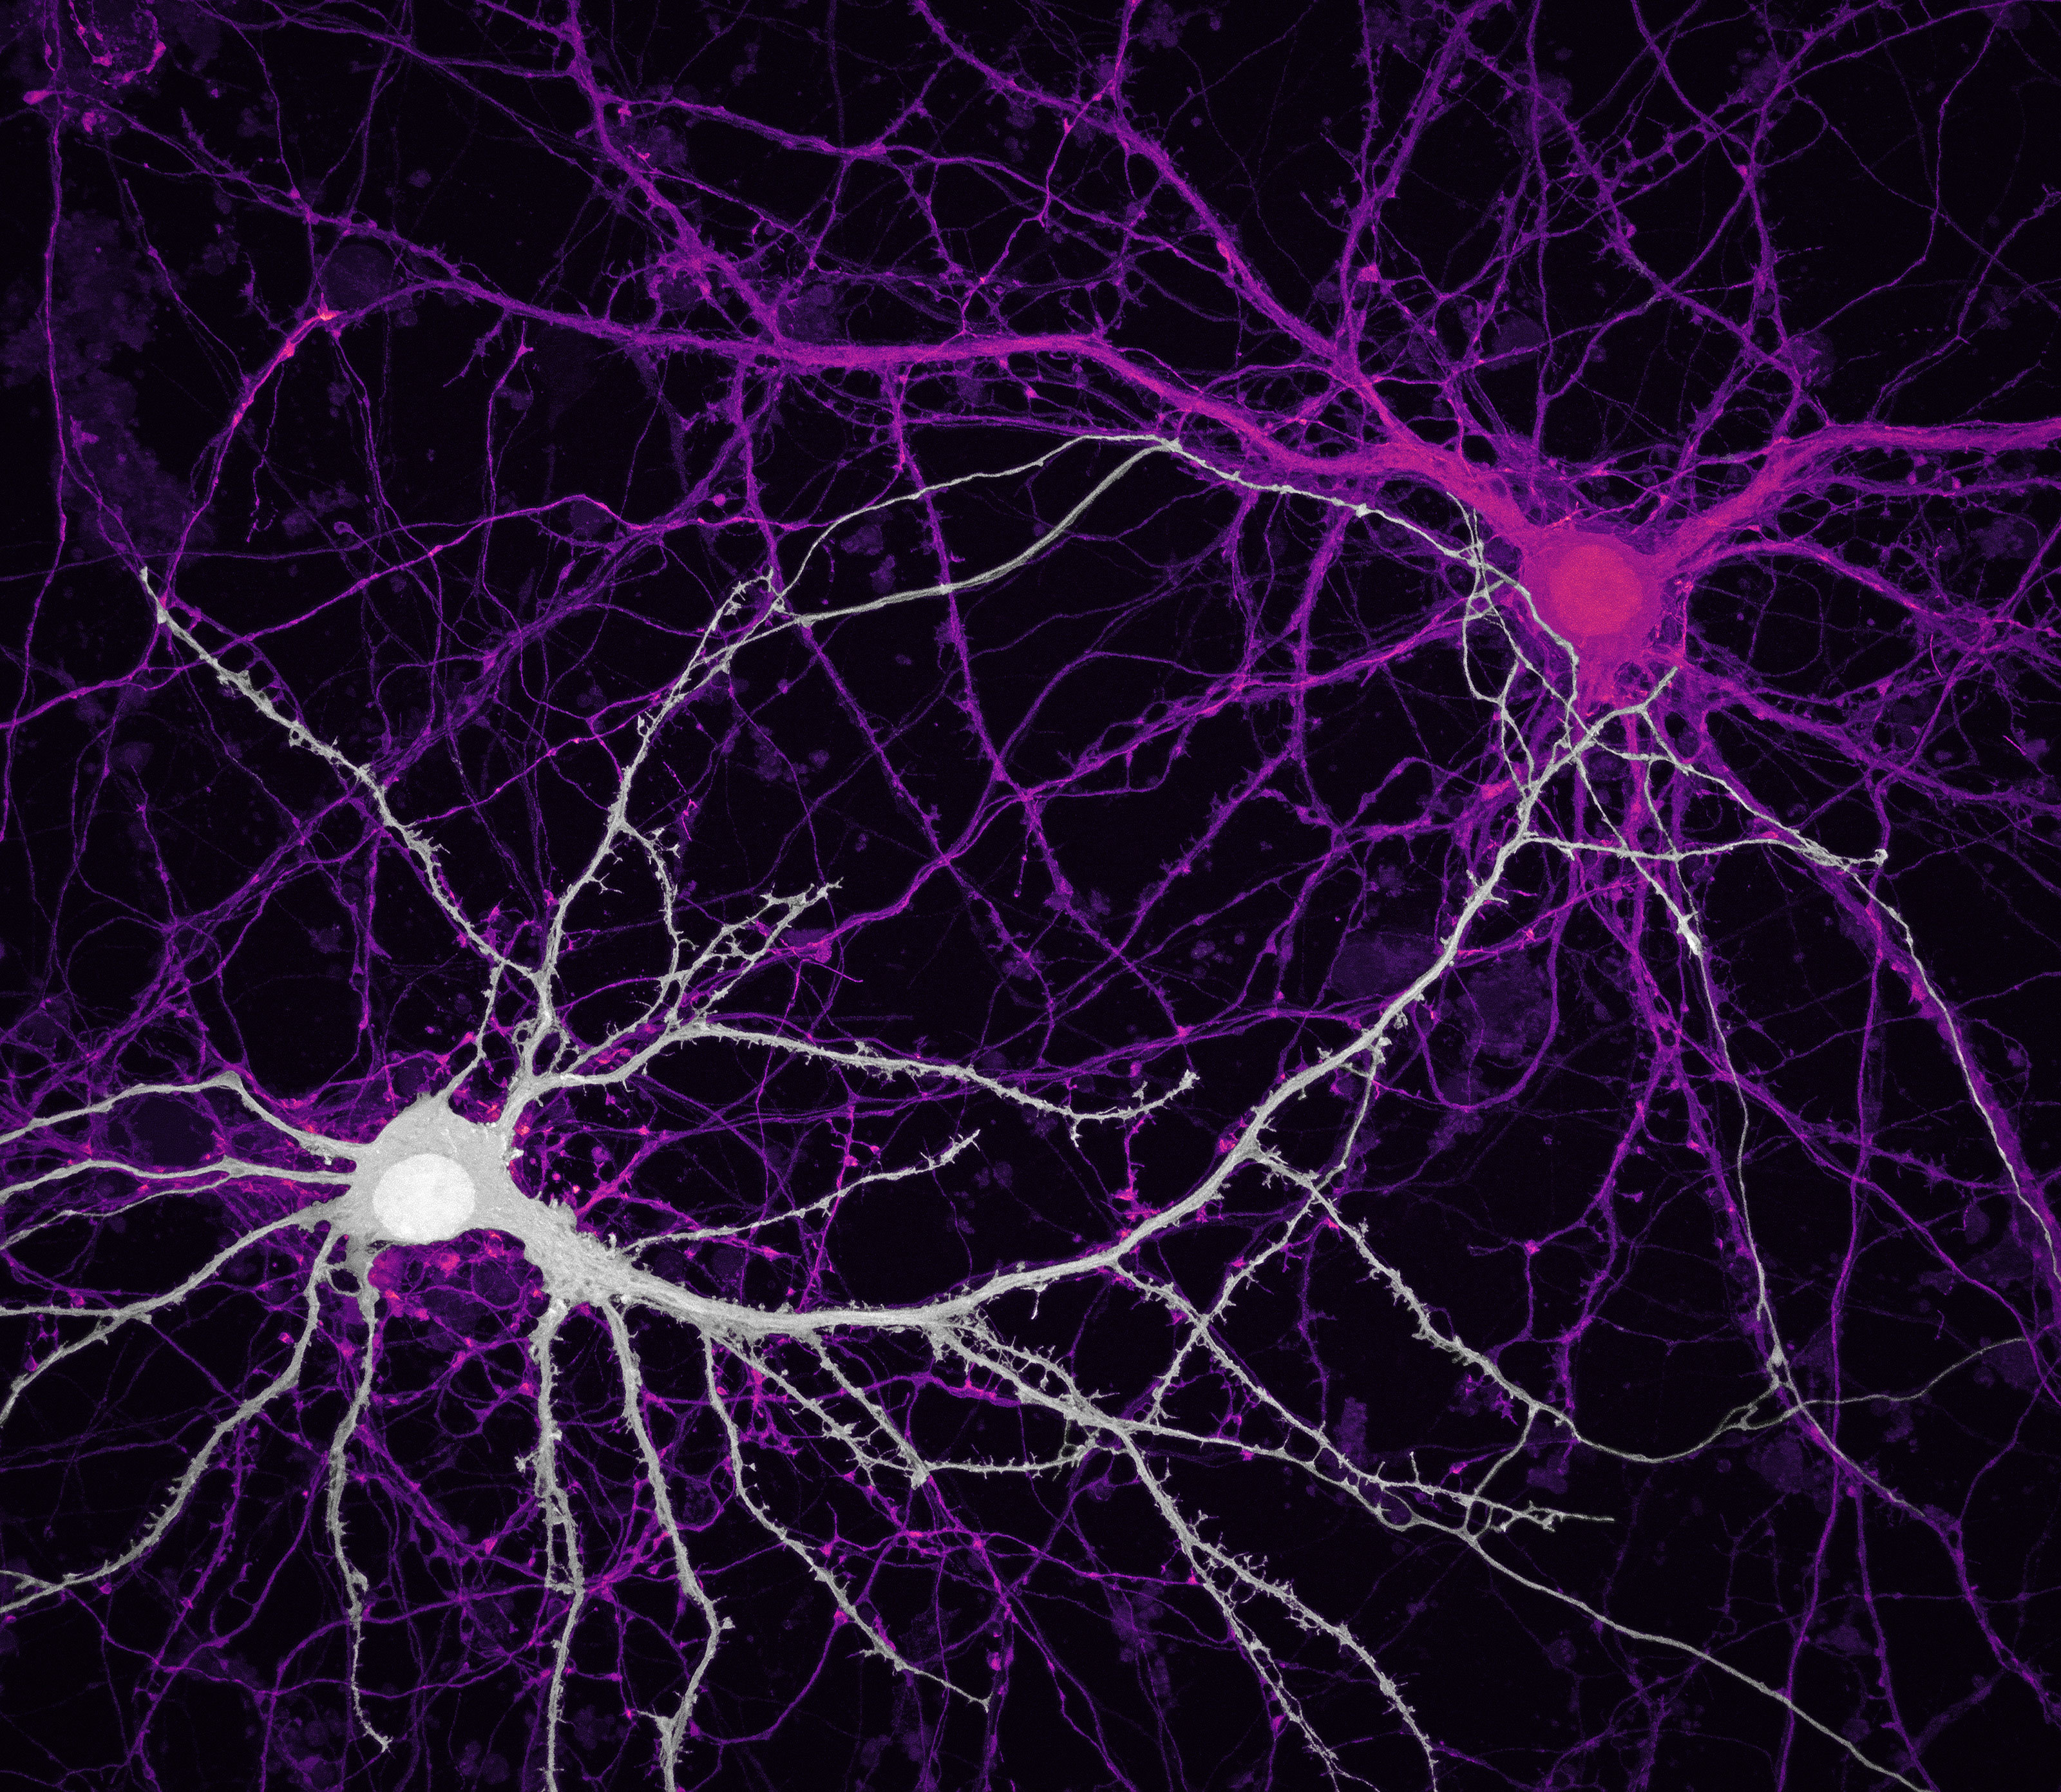 2020 nikon photomicrography competition winners - Connections between hippocampal neurons (brain cells)